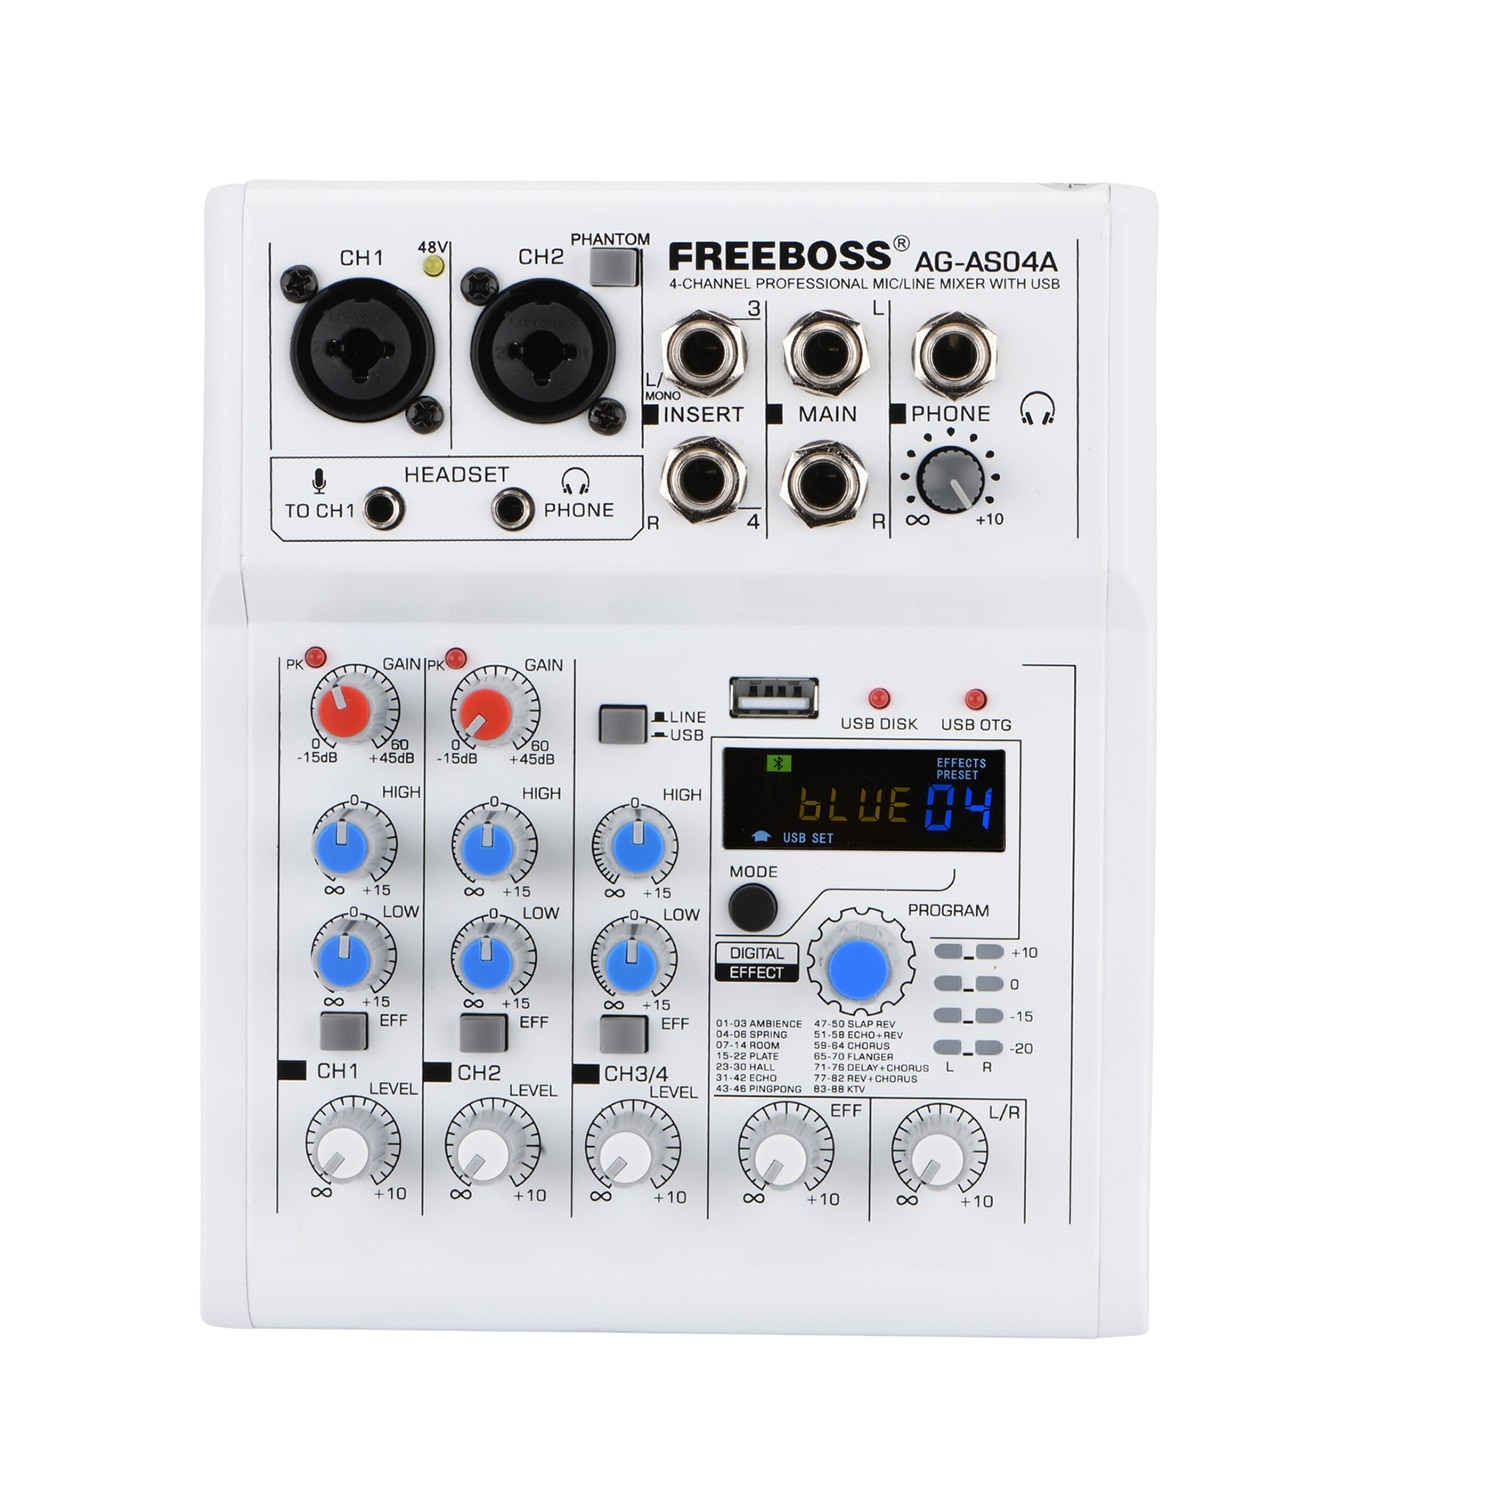 FREEBOSS Audio Mixer 4 Channel Mini Sound Mixing Table Bluetooth USB PC Play Record Portable DJ Console for Karaoke AG-AS04A